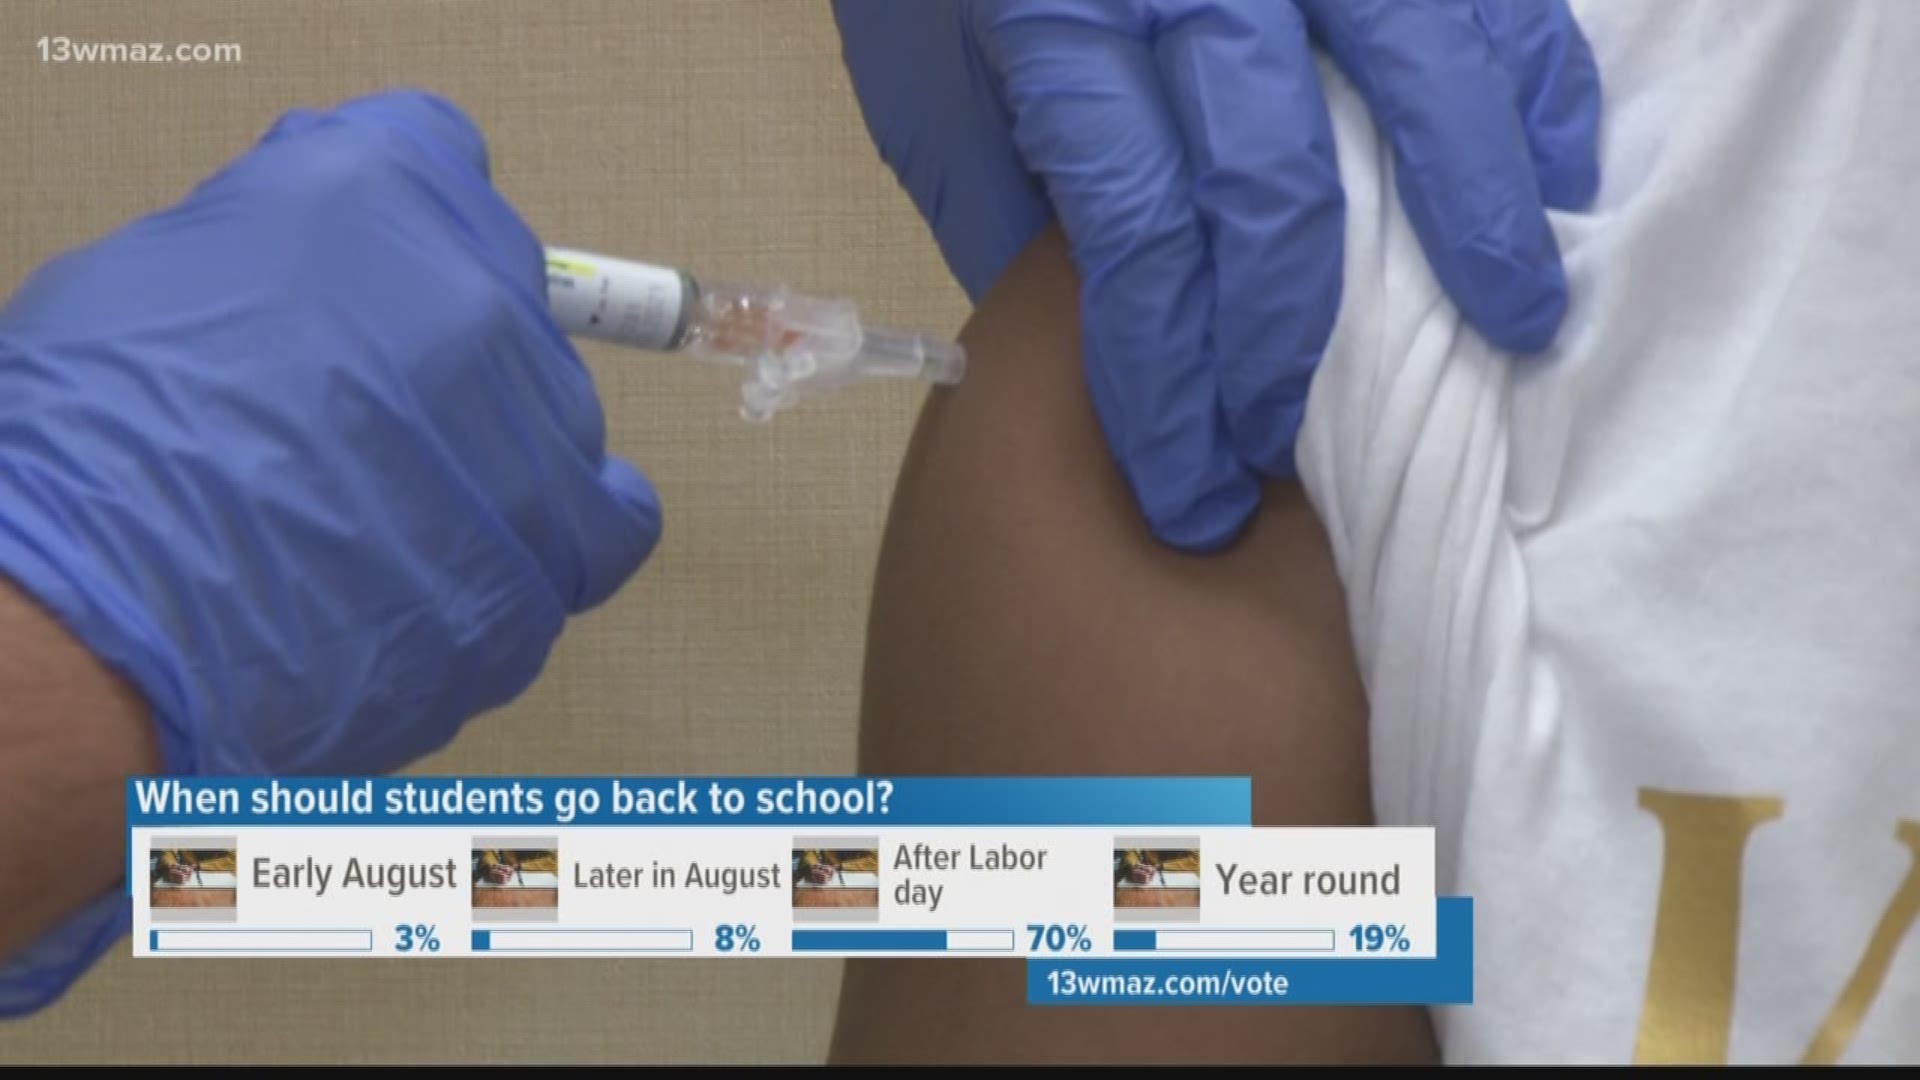 A less-enjoyable back-to-school requirement is getting up to date on shots and vaccines. Chelsea Beimfohr reminds us what's required by state law, and why one pediatrician says vaccinations are important not only to your own kids, but all the kids they come in contact with.